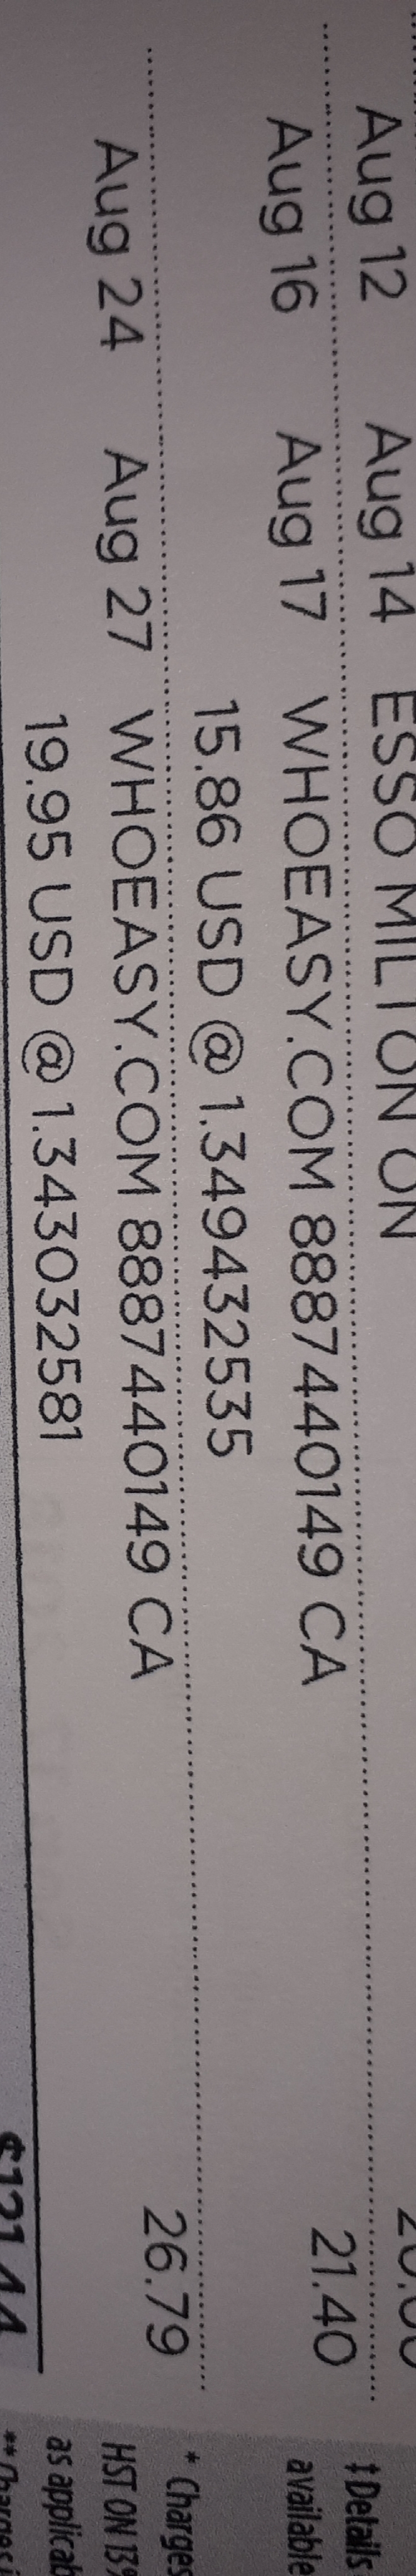 proof of charges on my bill